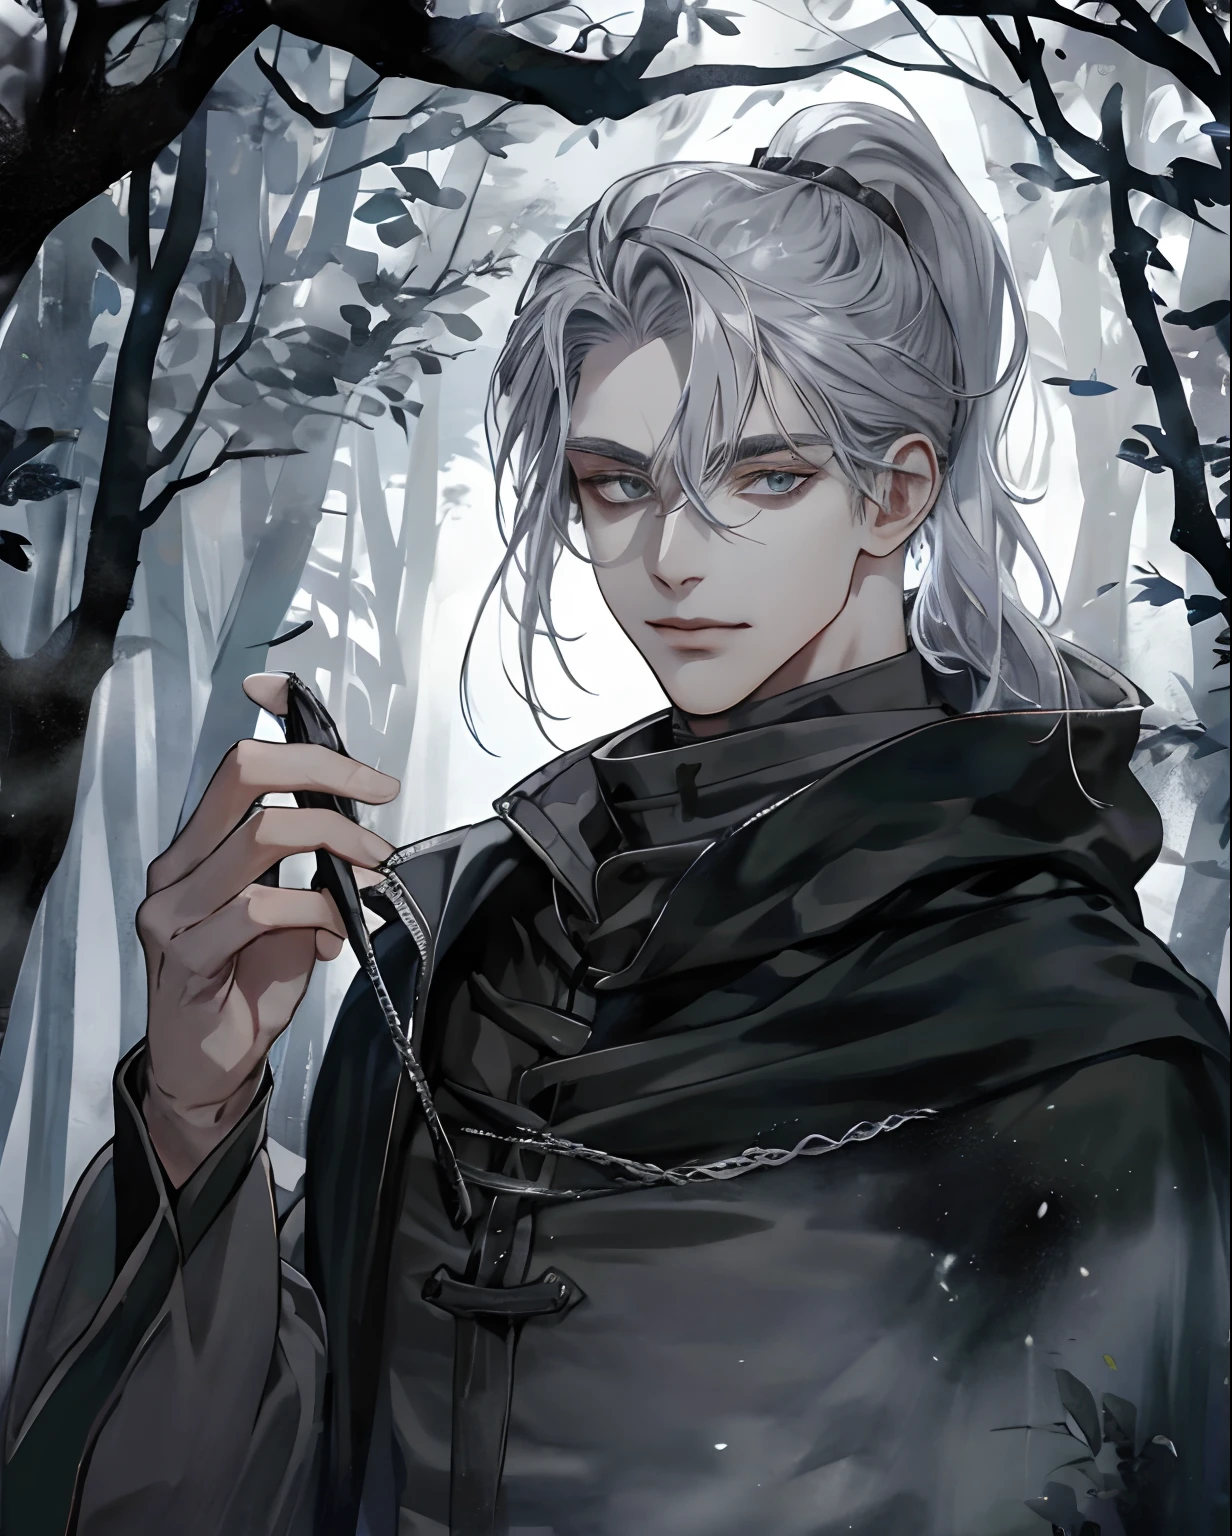 1male, beautiful, silver hair with low ponytail, dark grey eyes, detailed eyes, black cloak, dark sorcerer, rogue mage, alone in a dark forest, depressed, medieval fantasy, blood magic